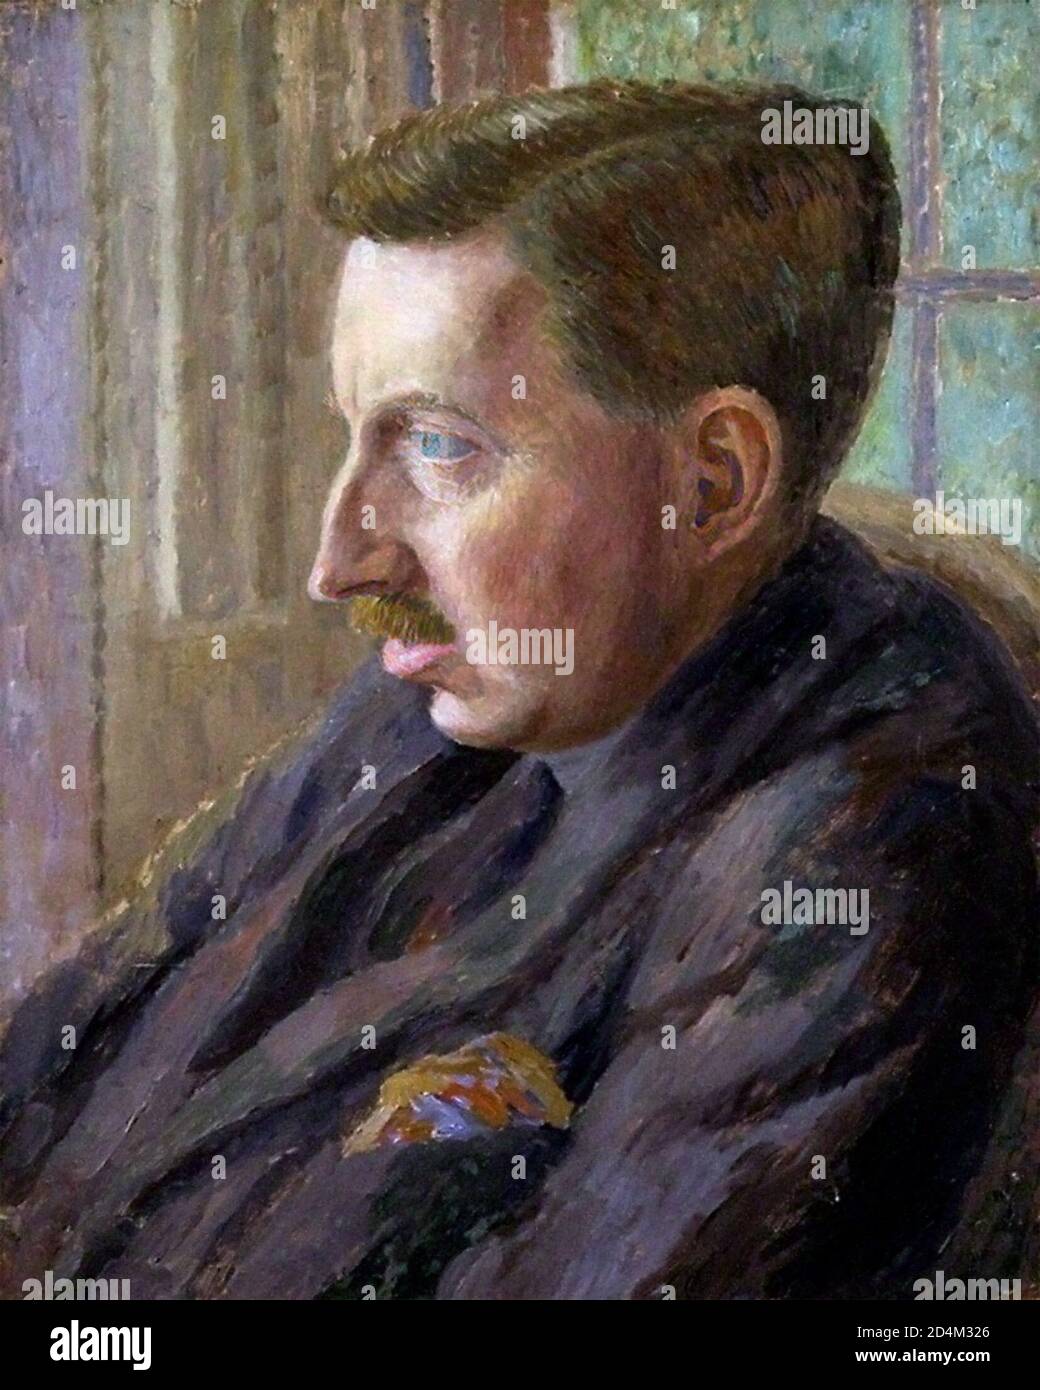 E. M. Forster. Portrait of the English writer Edward Morgan Forster (1879-1970) by Dora Carrington, oil on canvas, c.1924/5 Stock Photo